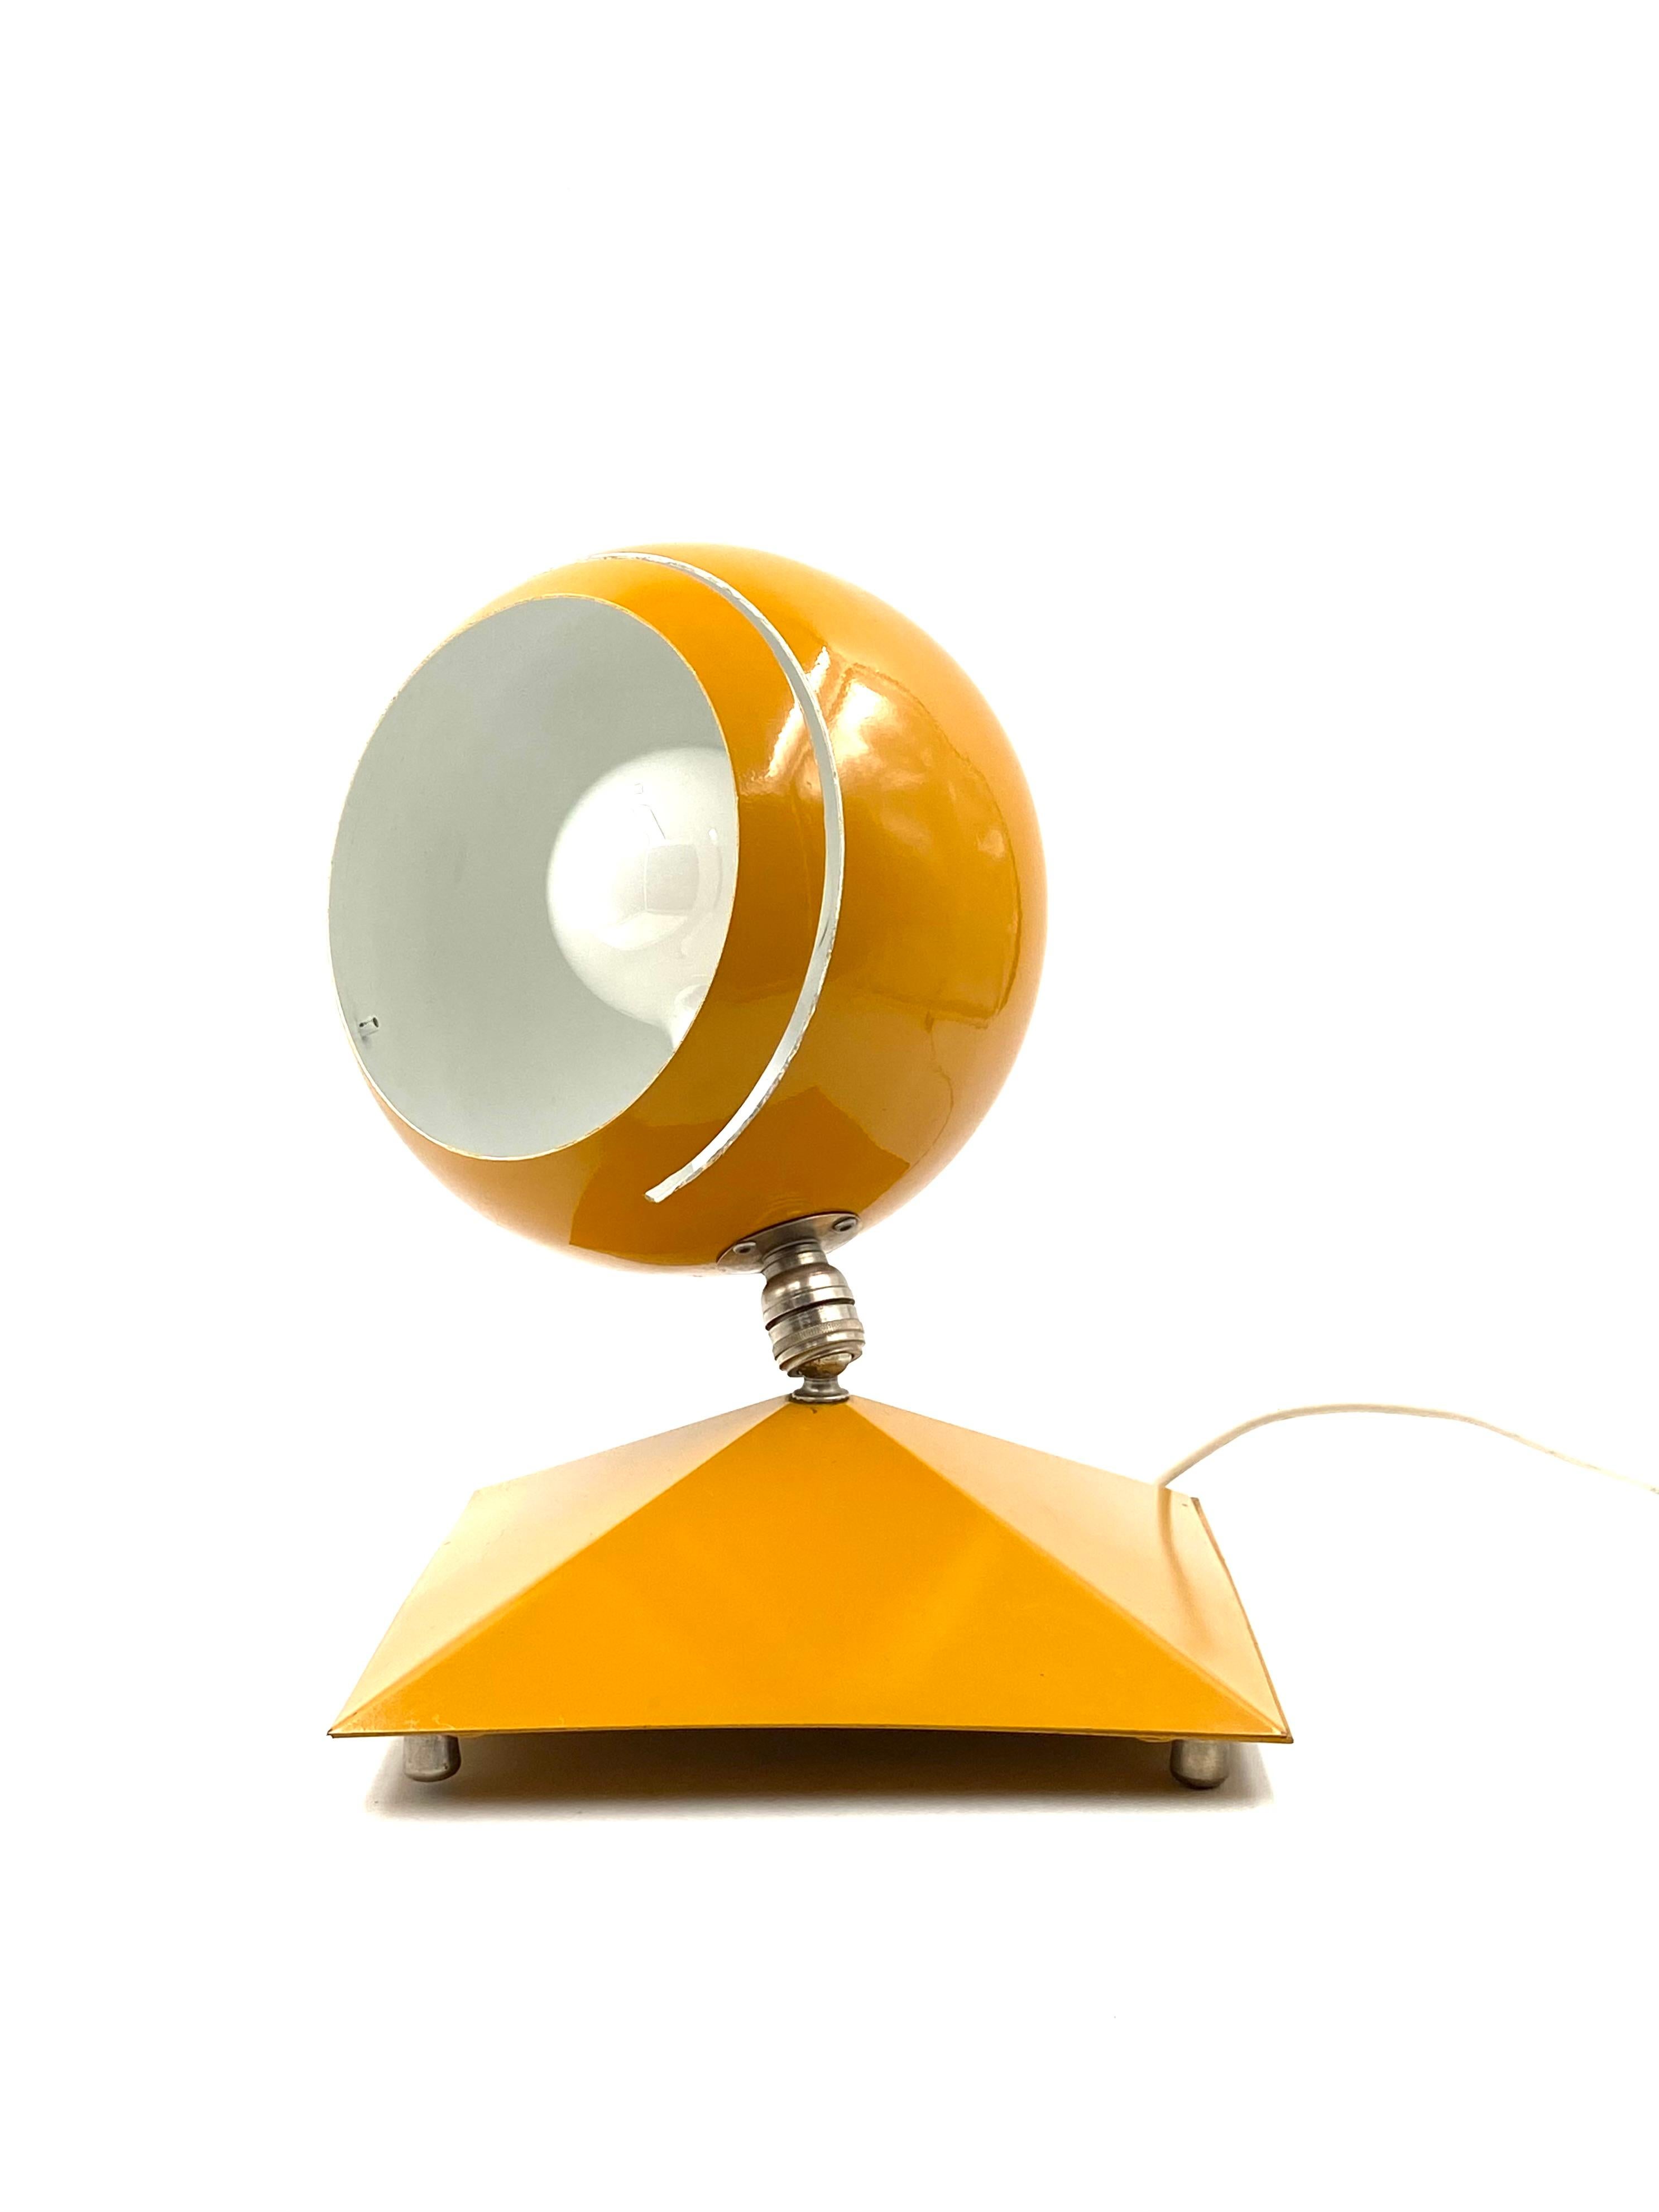 Space Age Eyeball Yellow Table Lamp, Italy, 1970s For Sale 6